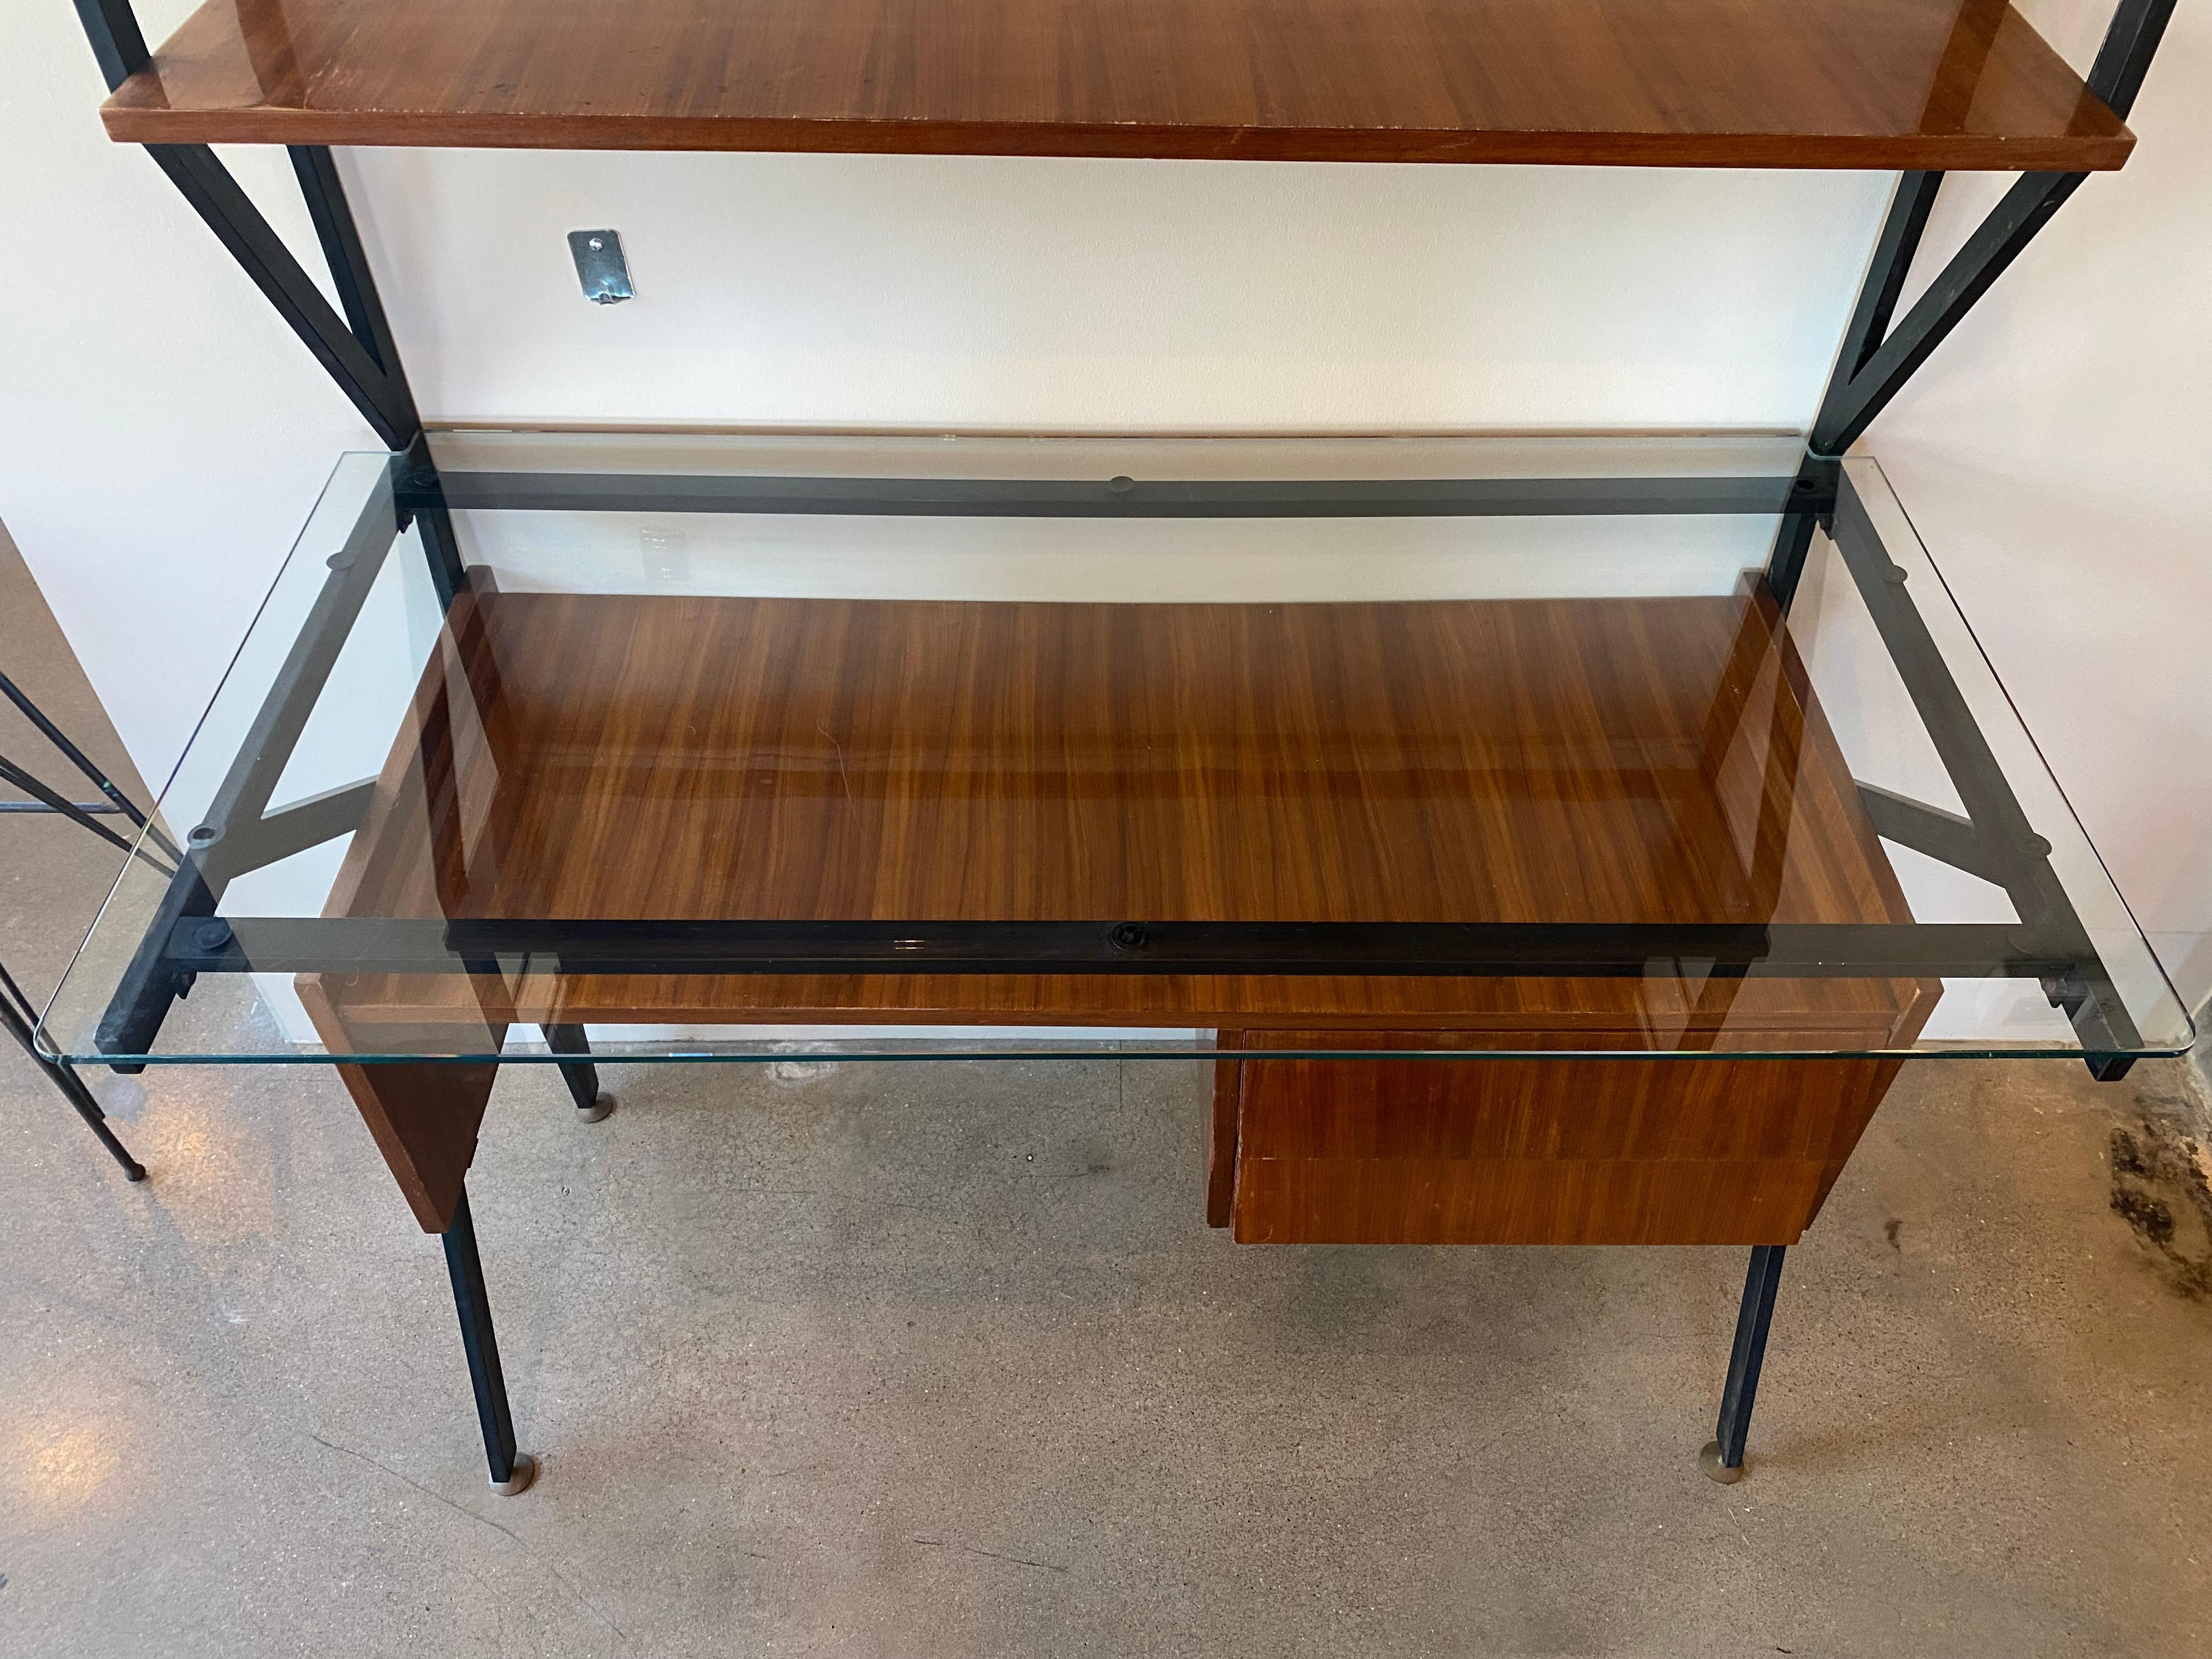 Italian Mid-Century Modern Desk with Shelves, Style of Ico Parisi For Sale 1